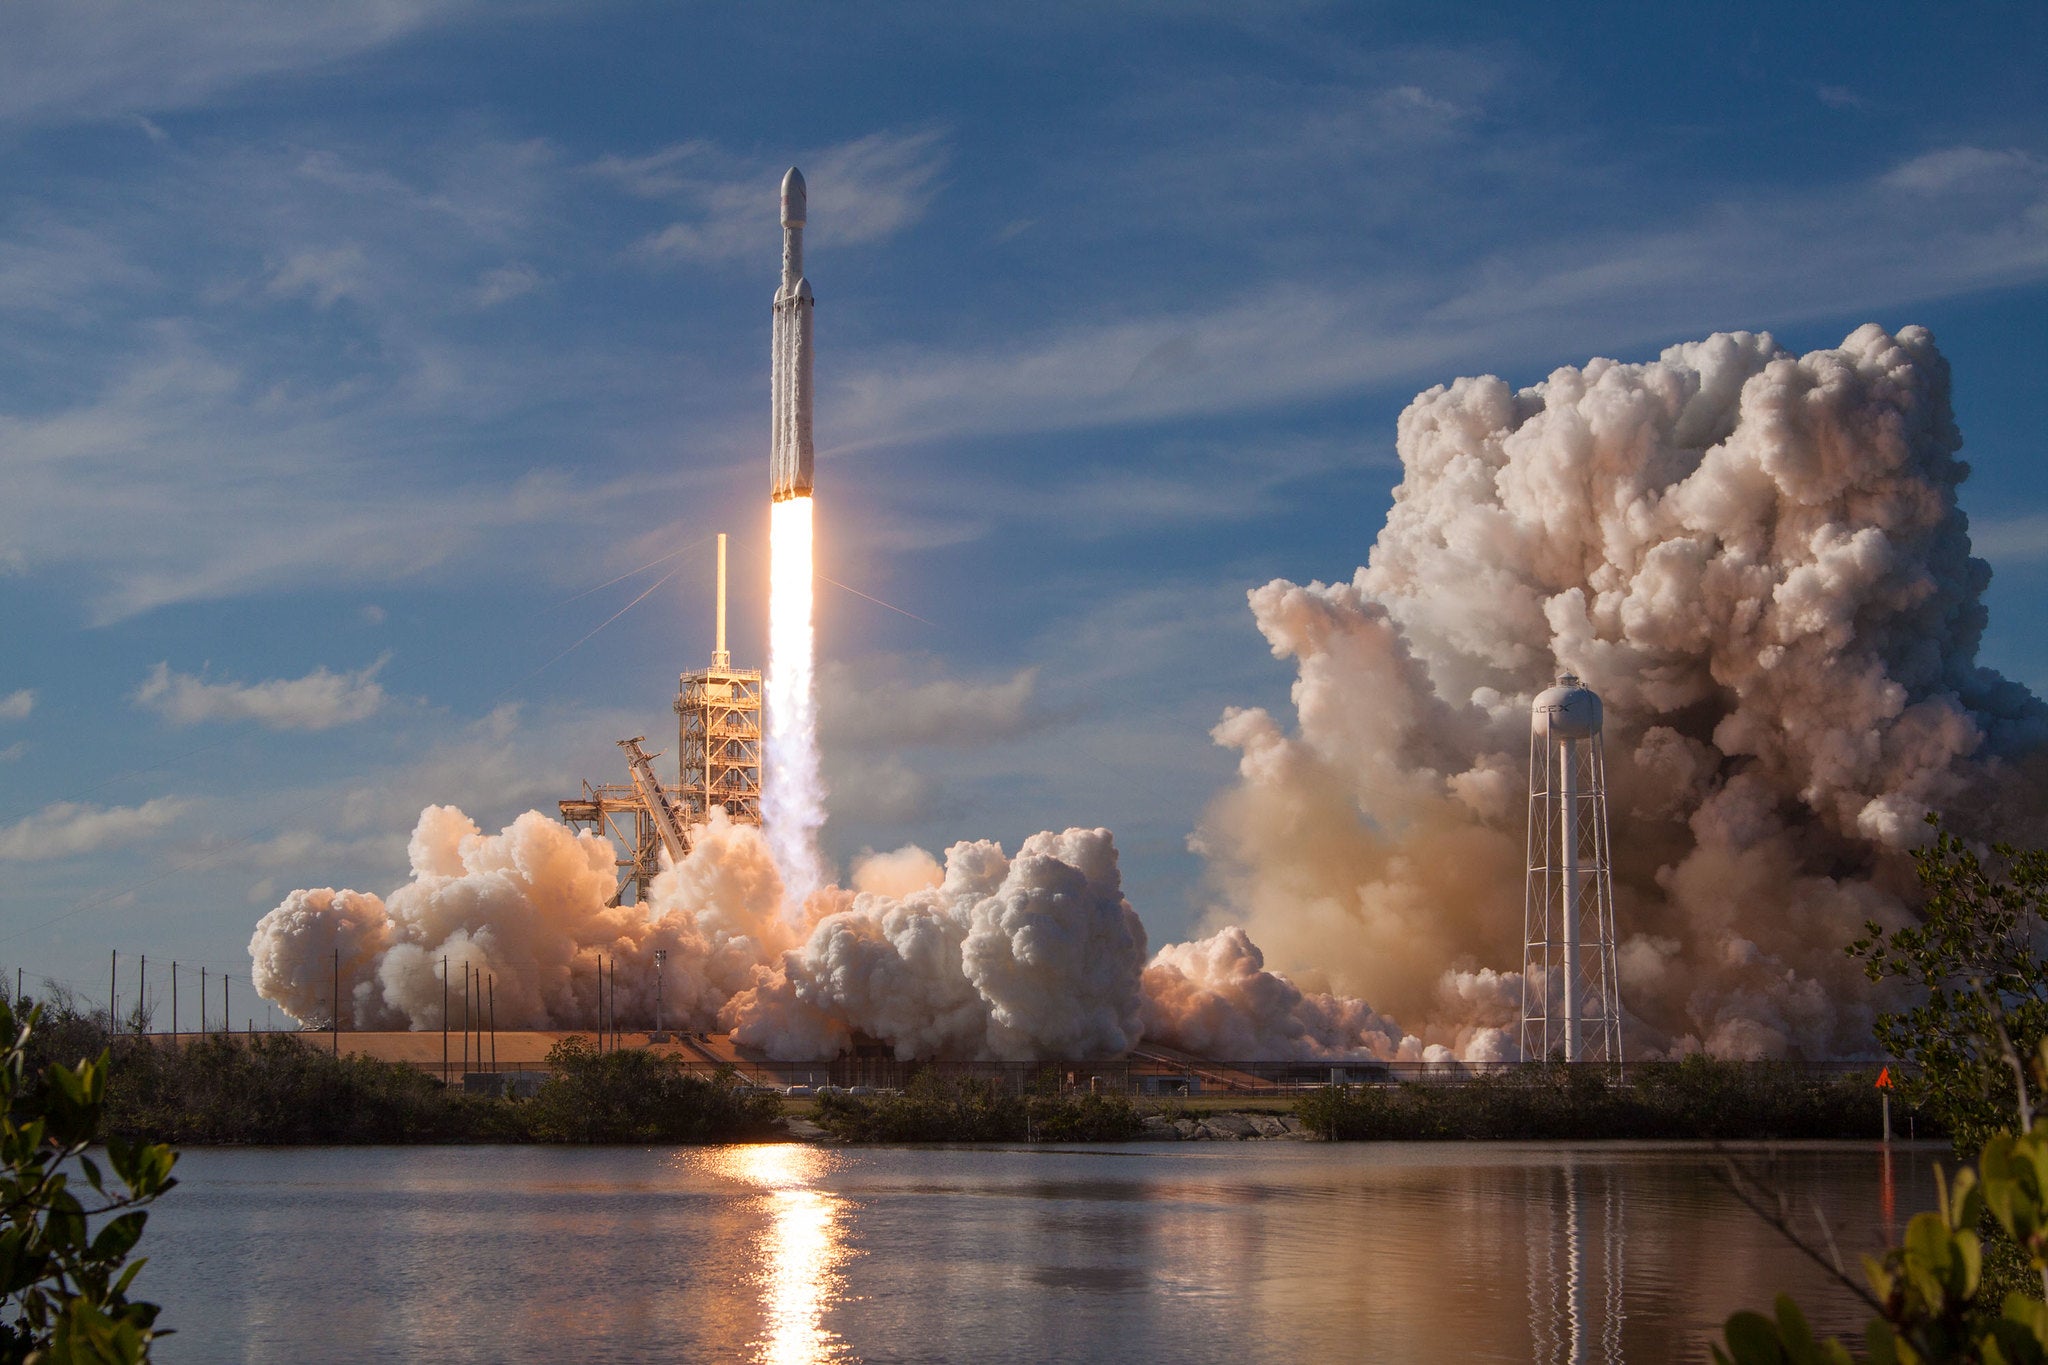 U.S. Space Force Modifies SpaceX Contract, Awards Over $16 Million More For A National Security Mission